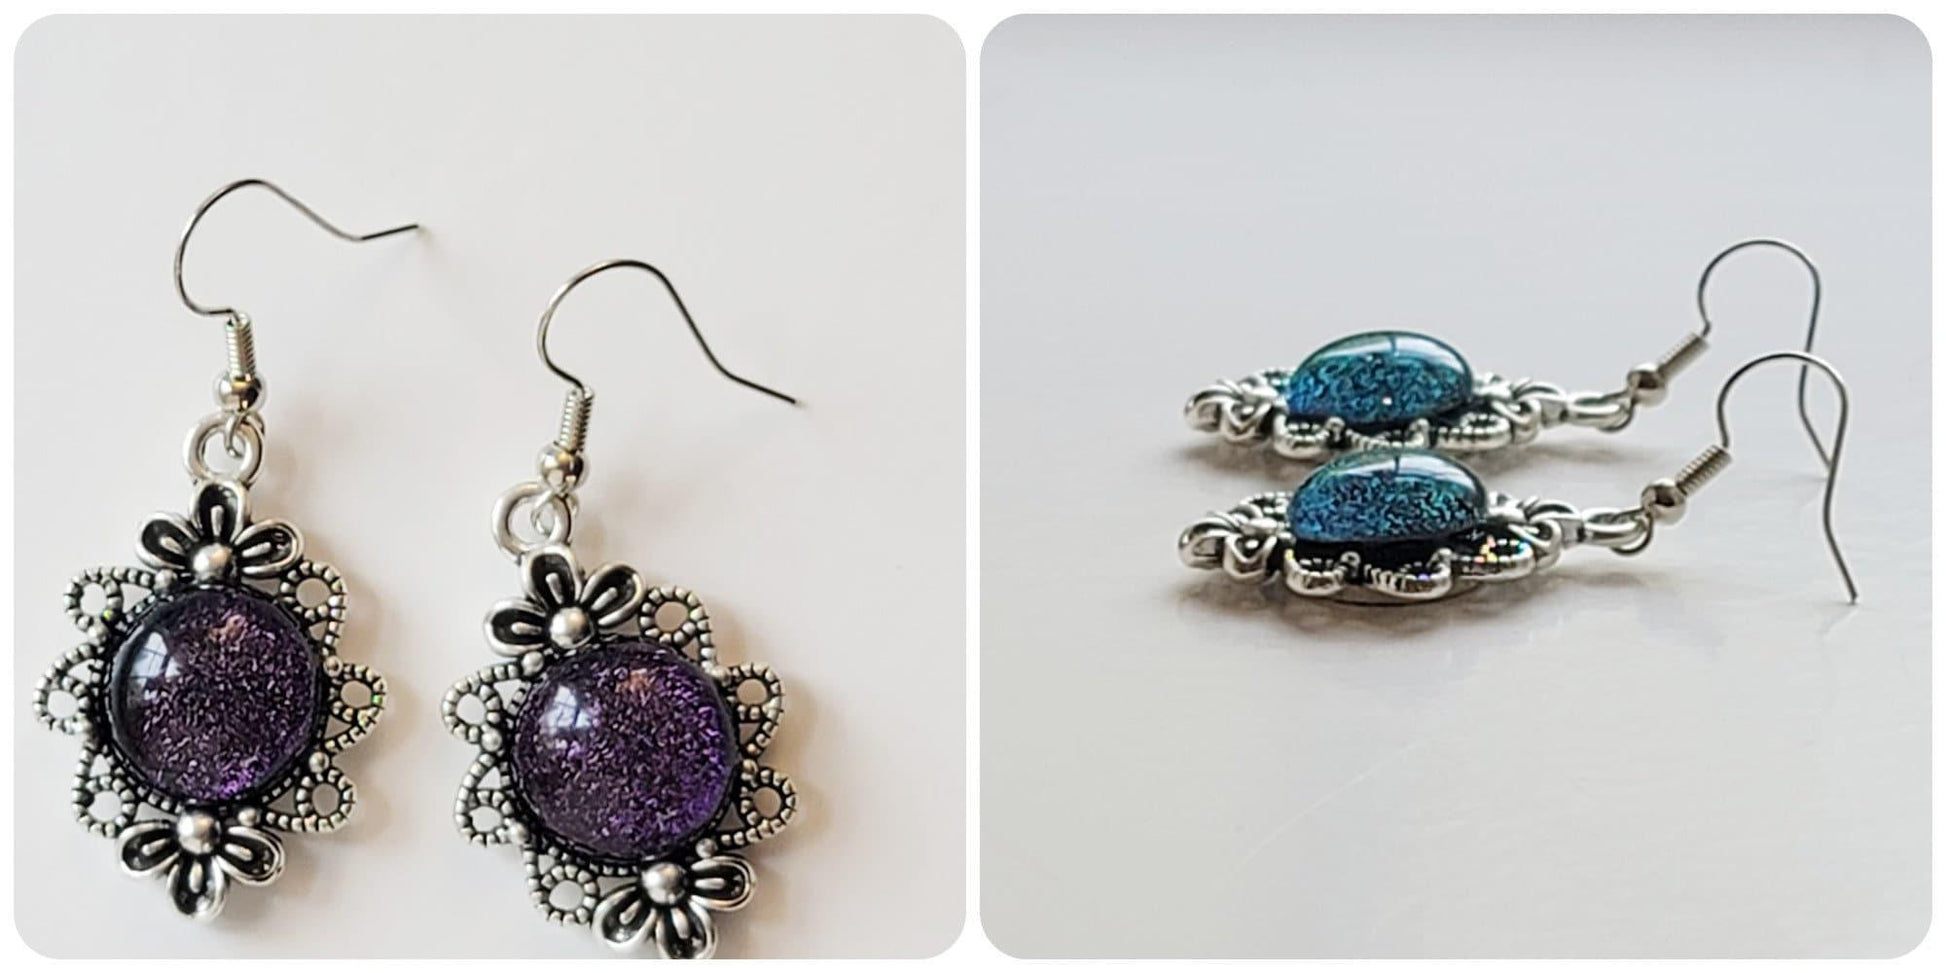 Silver tone flower earrings with color shifting purple dichroic fused glass cabo pierced seedsglassworks seeds glassworks